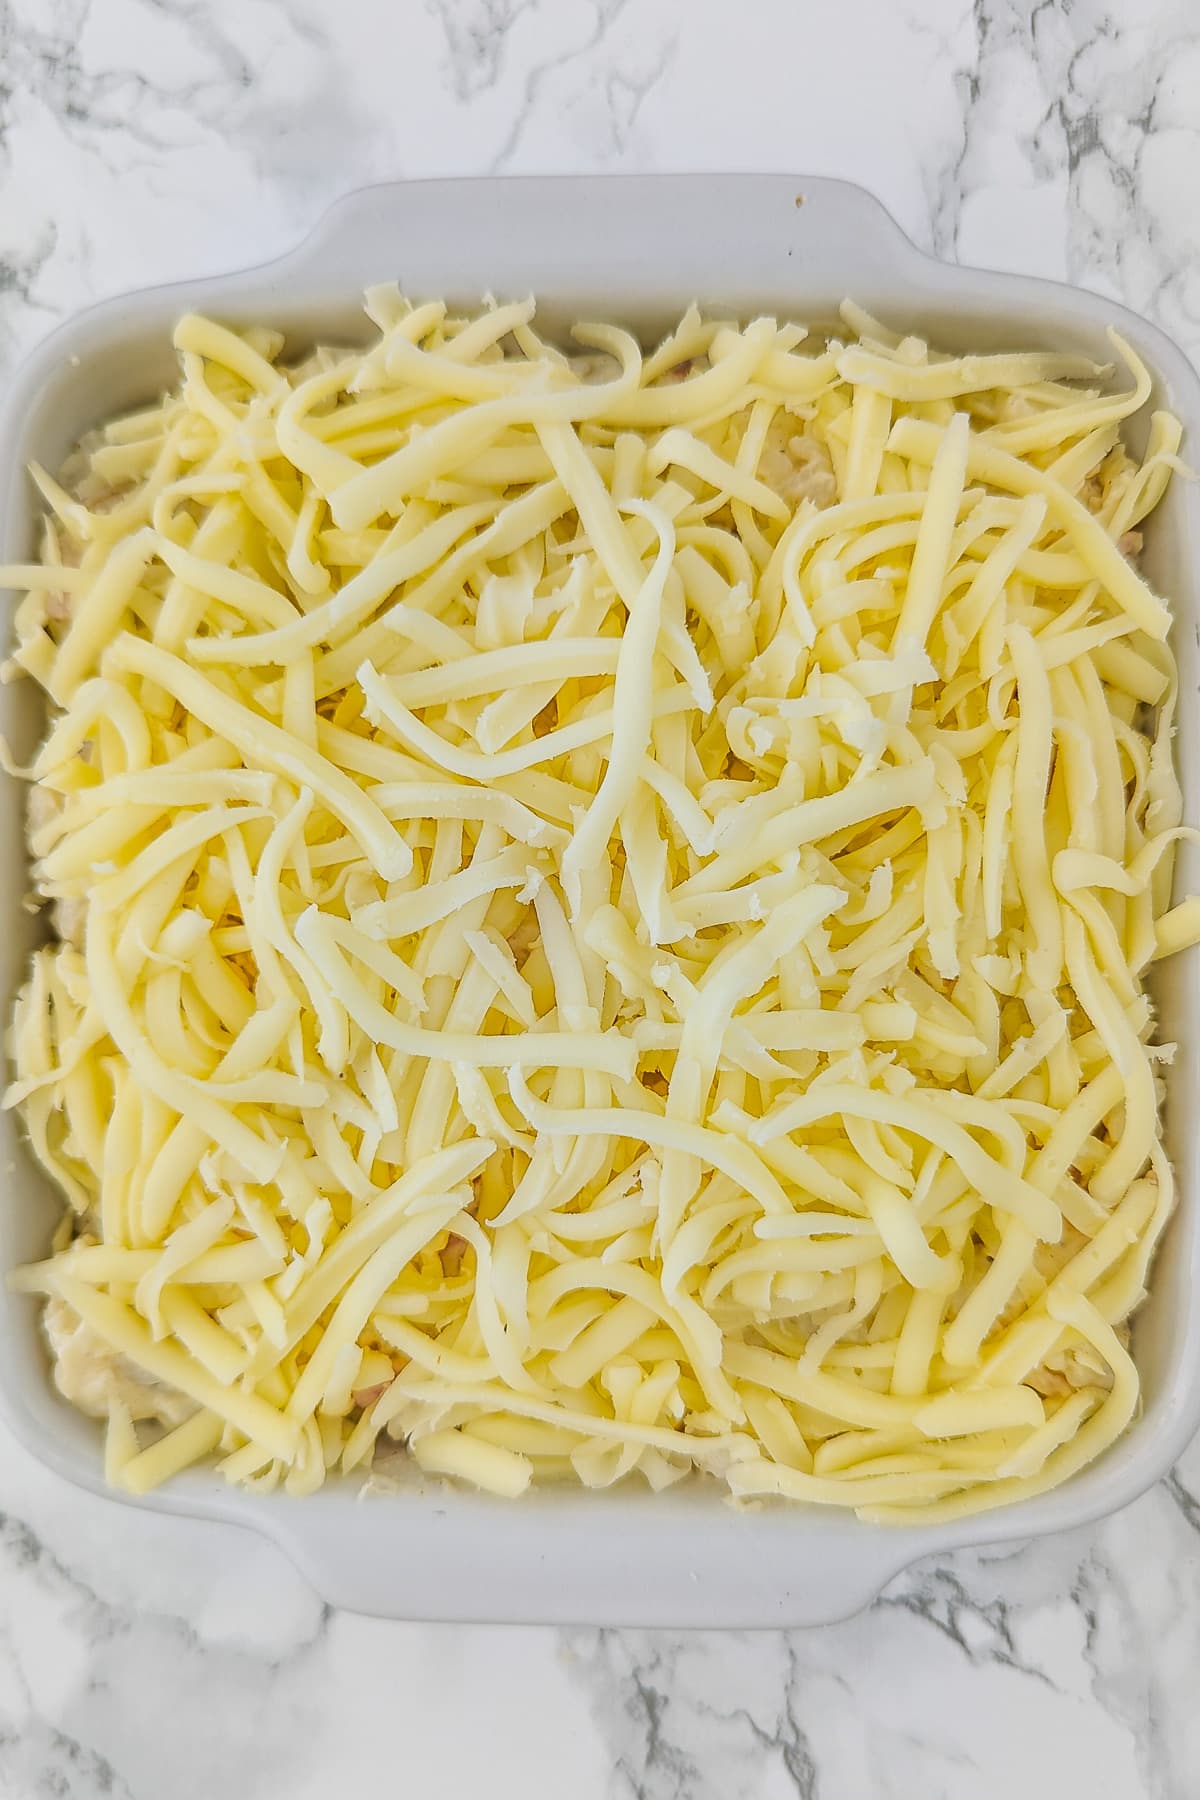 White baking dish topped with shredded parmesan cheese on a white marble table.